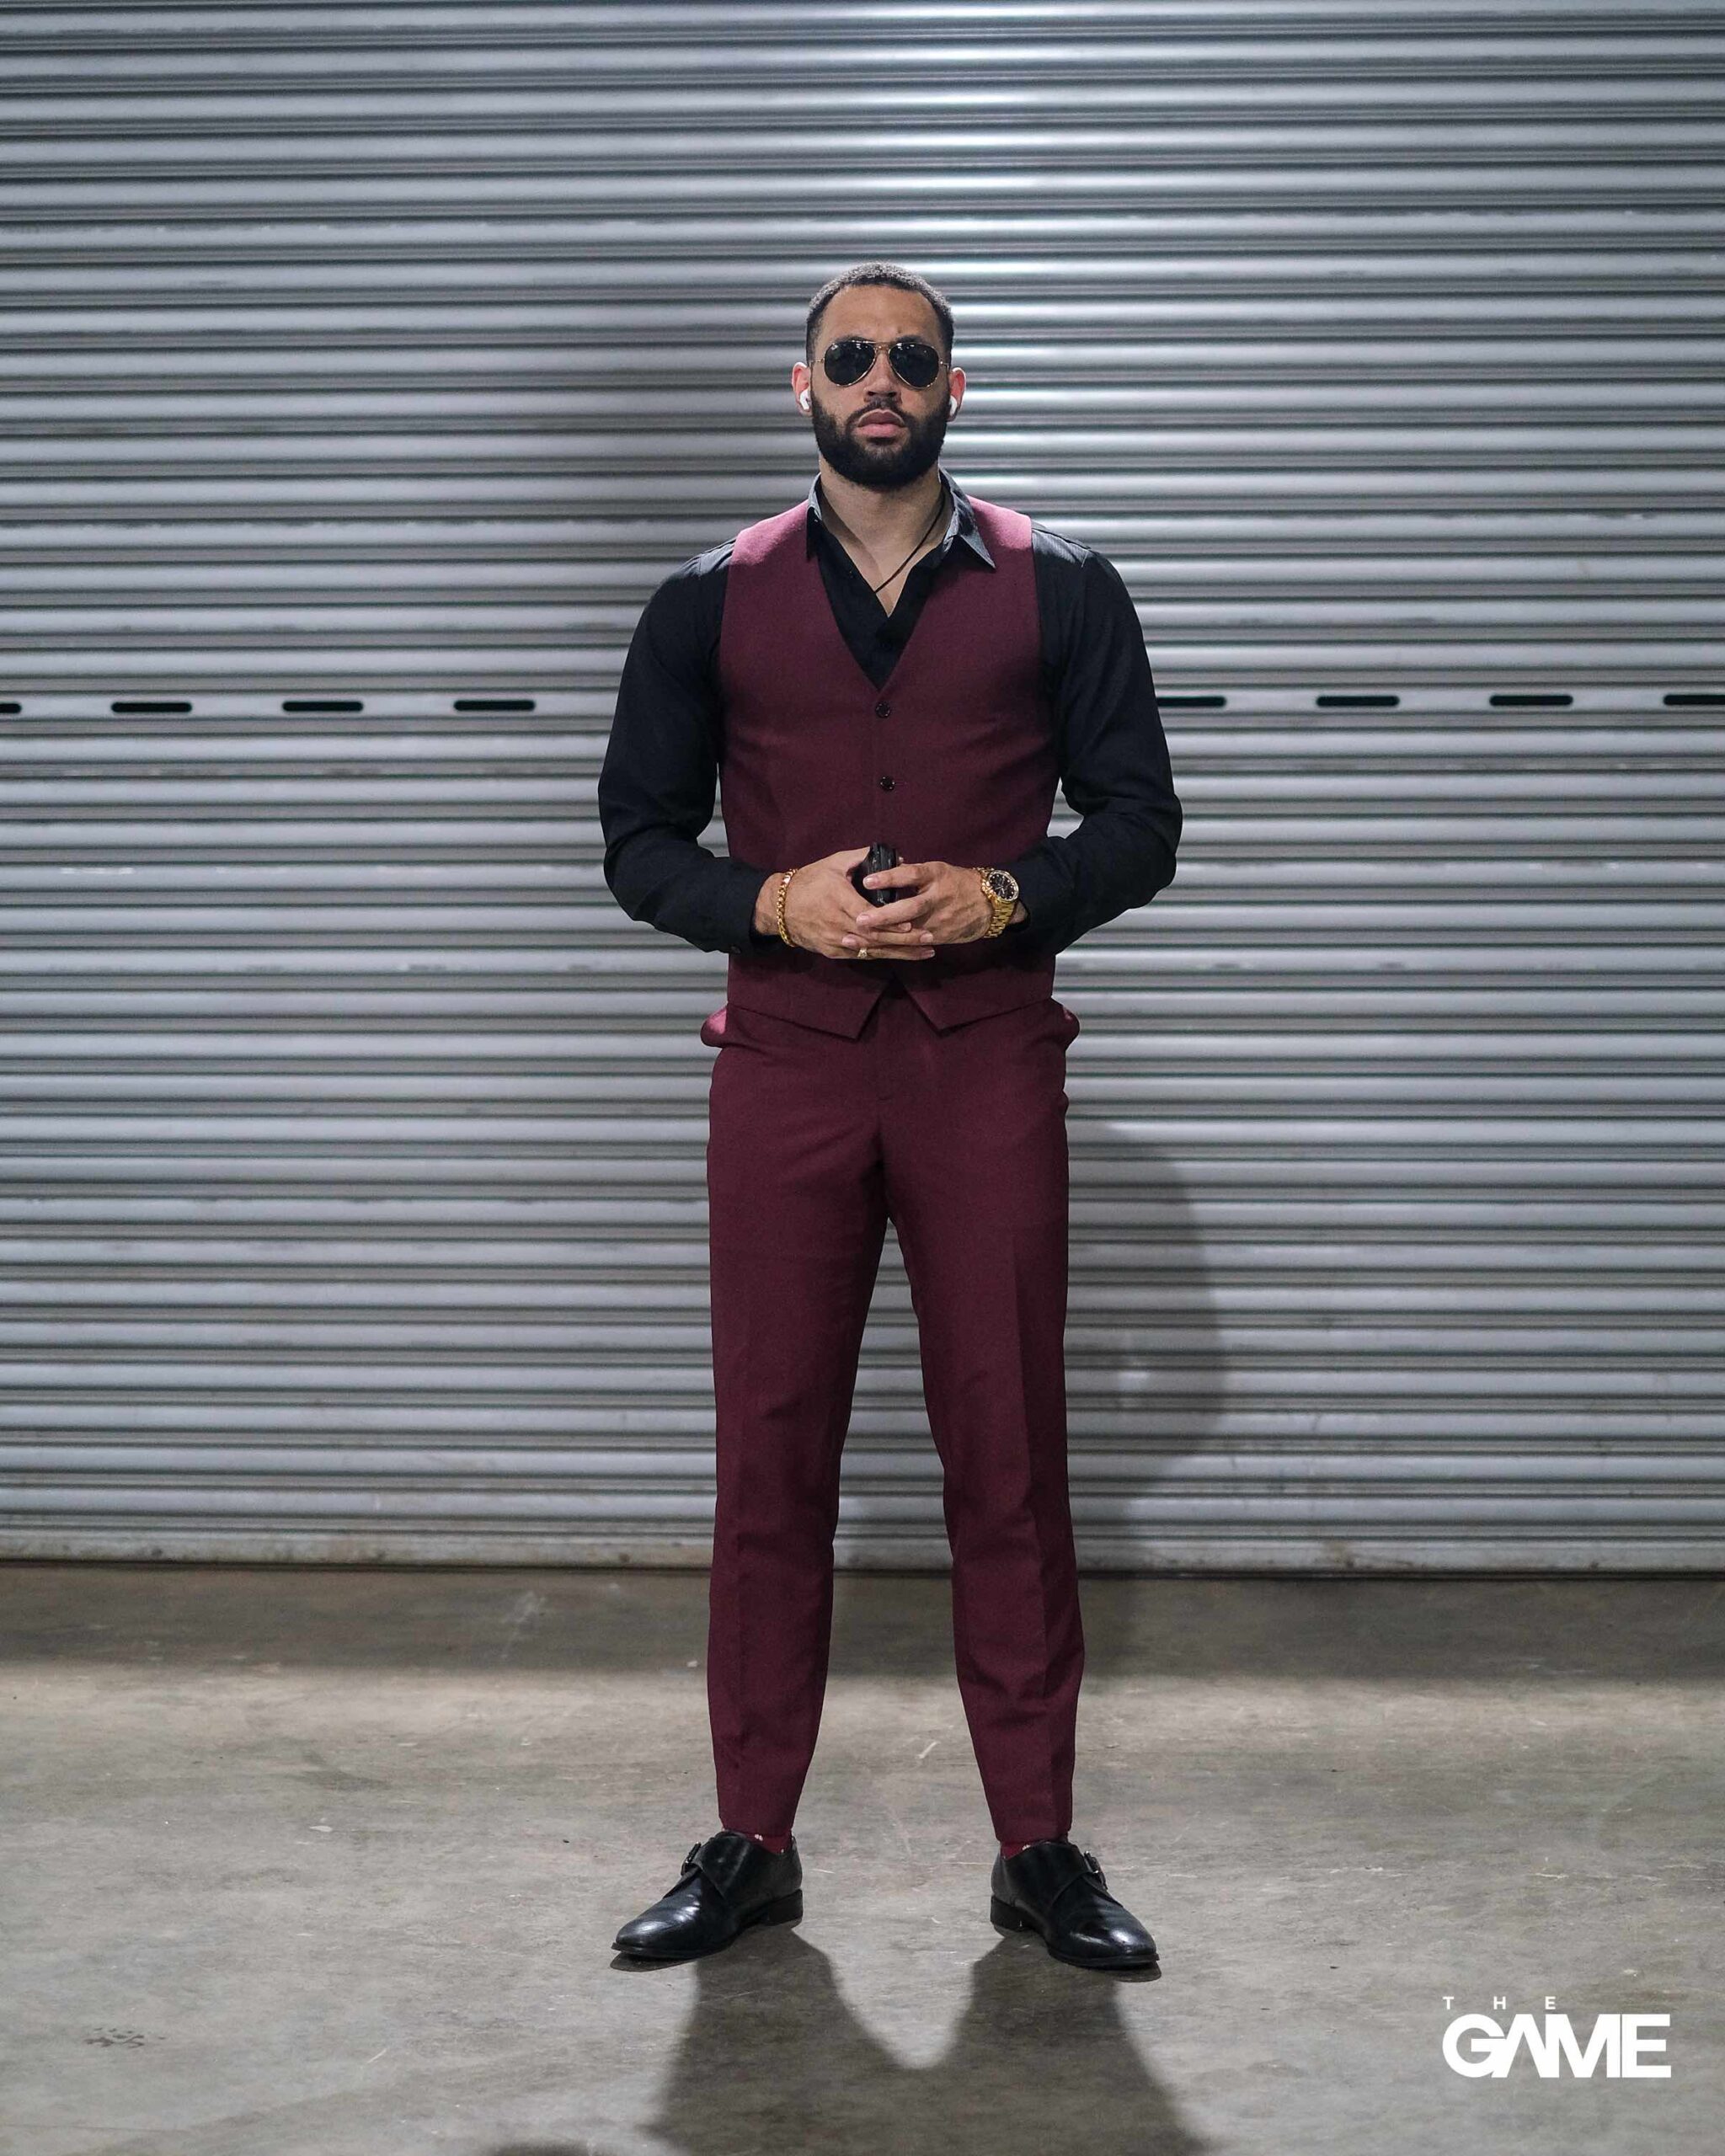 The GAME Tunnel Vision: Ben Phillips Outfits